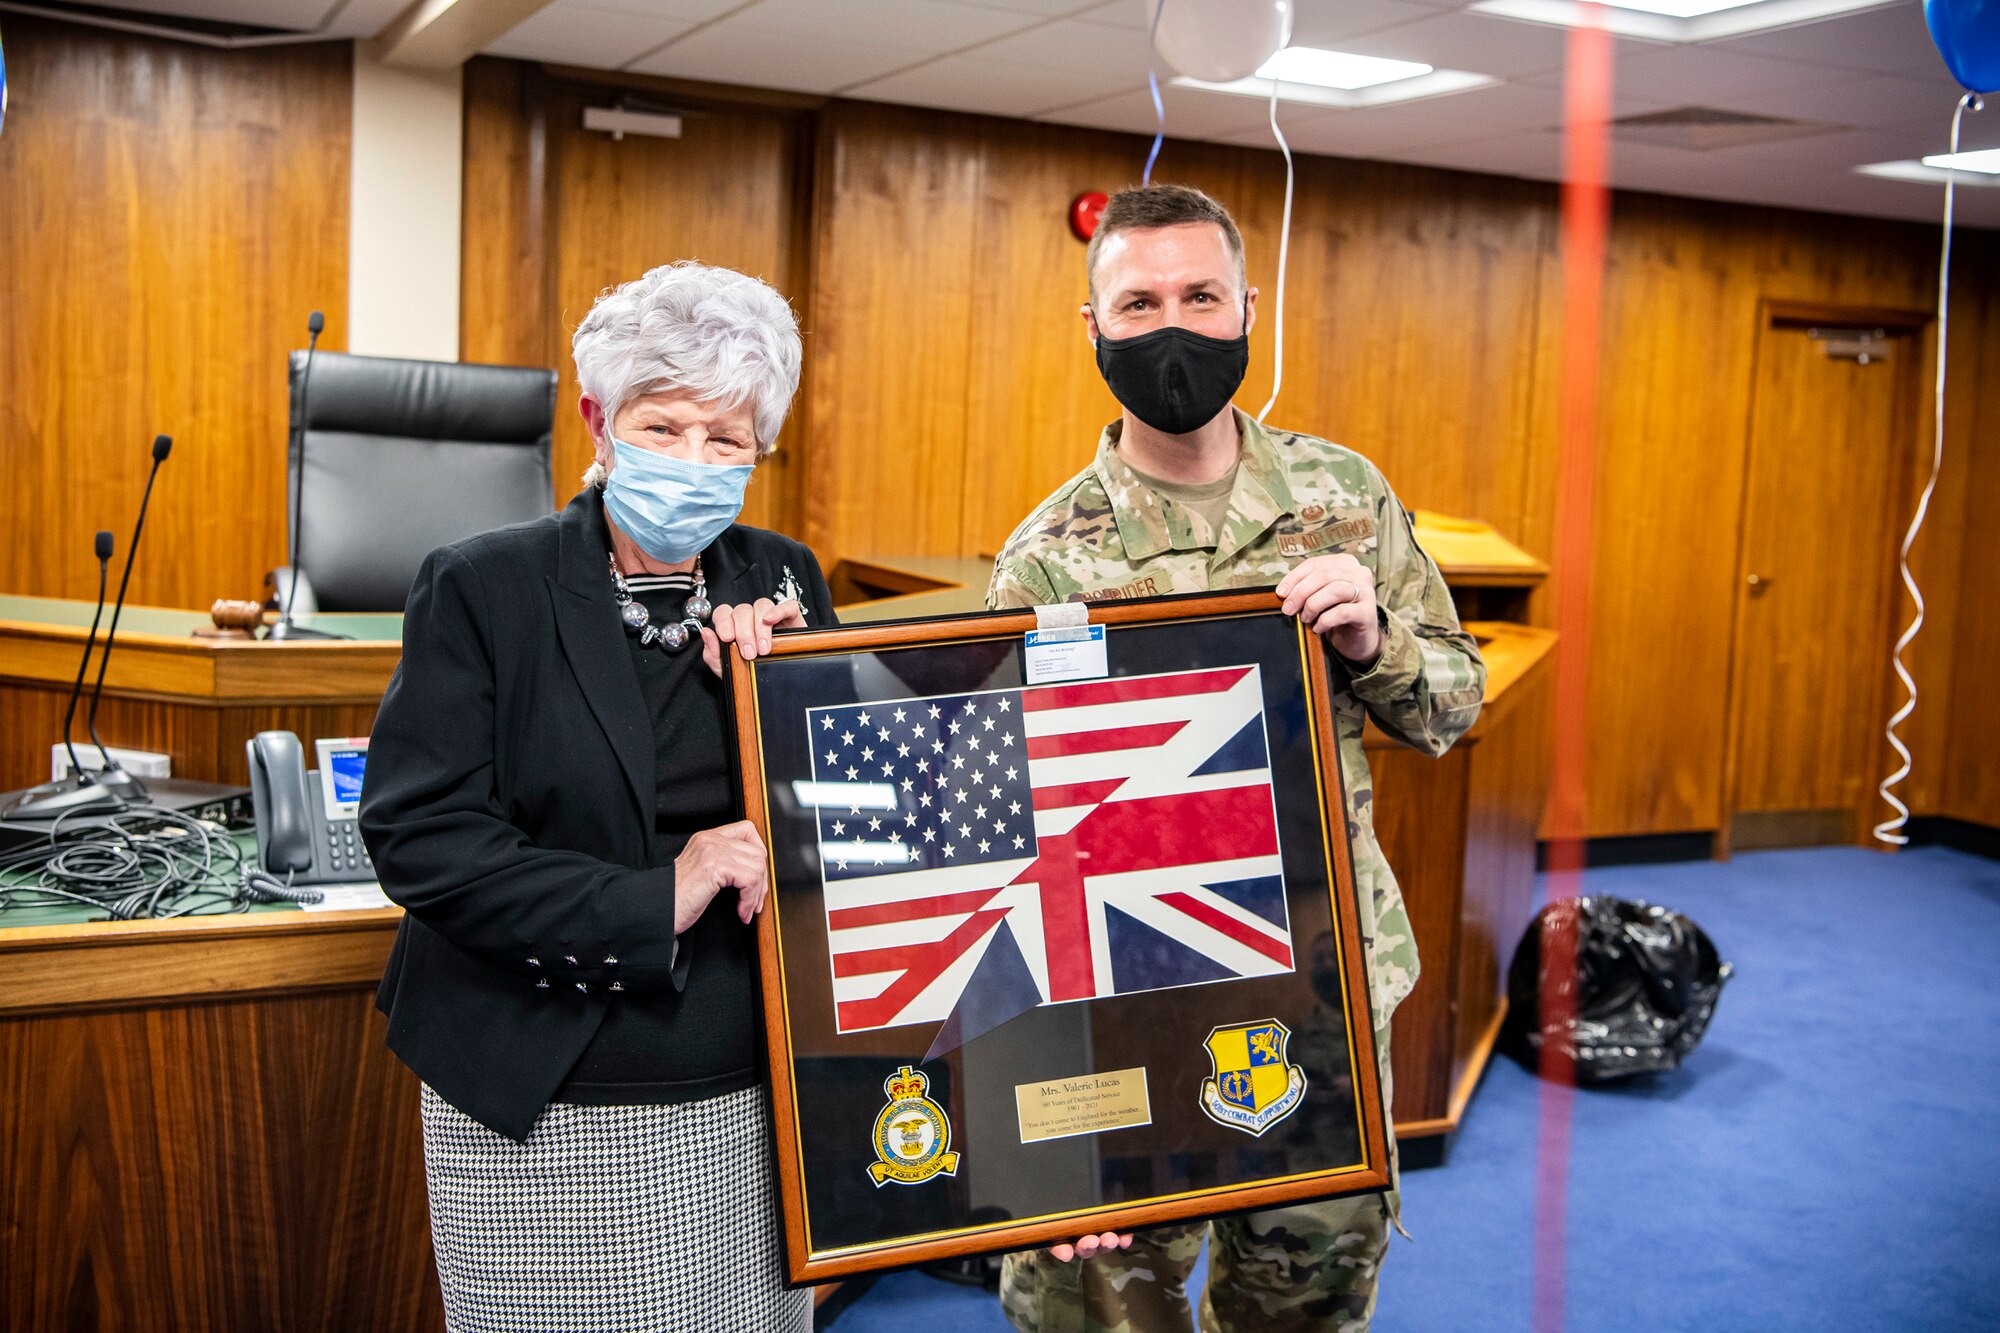 U.S. Air Force Maj. Richard Schrider, right, 501st Combat Support Wing staff judge advocate, presents a gift to Valerie Lucas,  501st Combat Support Wing British liaison officer, during a celebration at RAF Alconbury, England, April 23, 2021.  The 501 CSW/JA office celebrated Mrs. Lucas for her over 60 years of service as the British liaison officer at RAF Alconbury. (U.S. Air Force photo by Senior Airman Eugene Oliver)